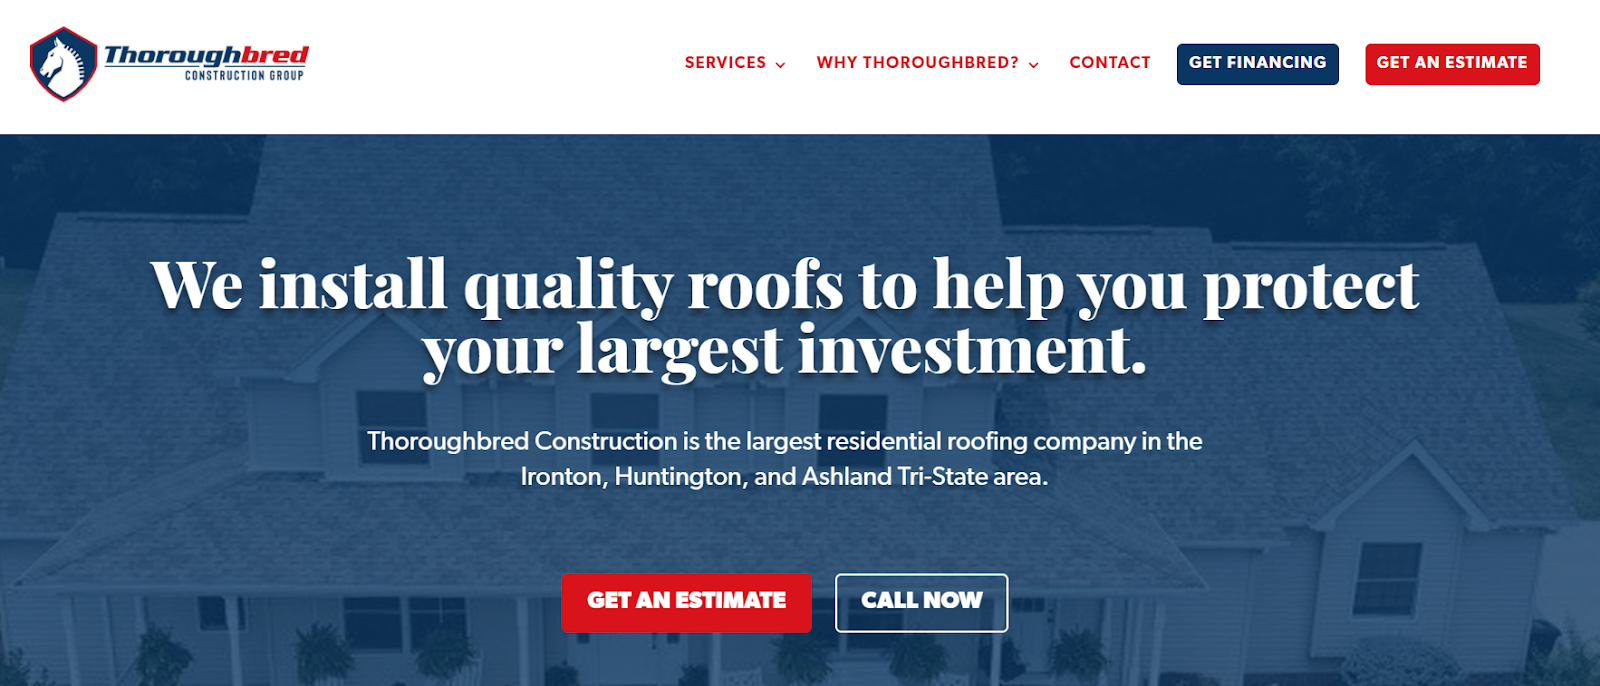 Thoroughbred Construction website